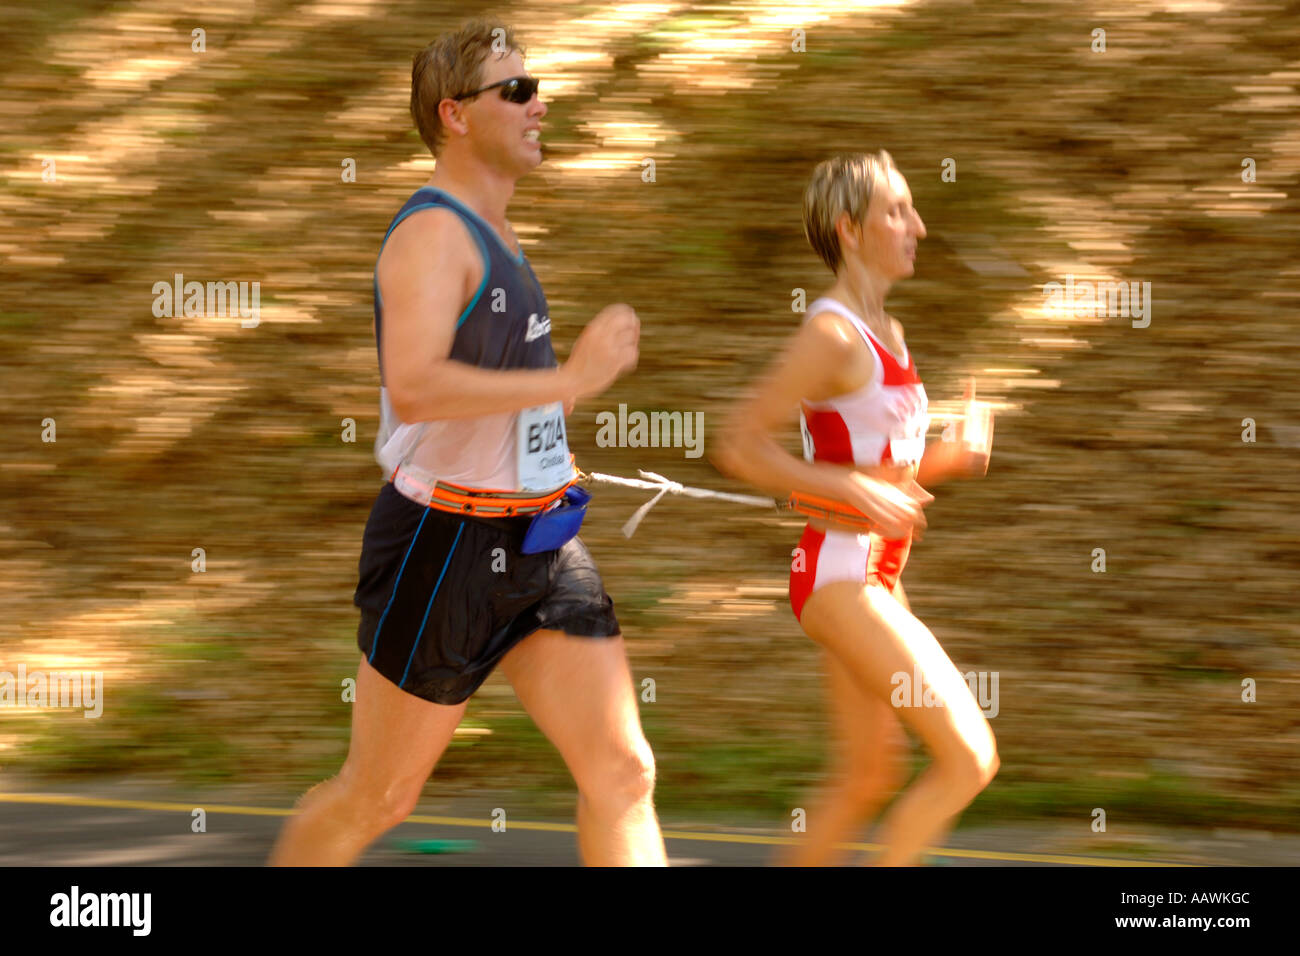 A couple run tethered in the 2006 Old Mutual Two Oceans marathon in Cape Town, South Africa. Stock Photo